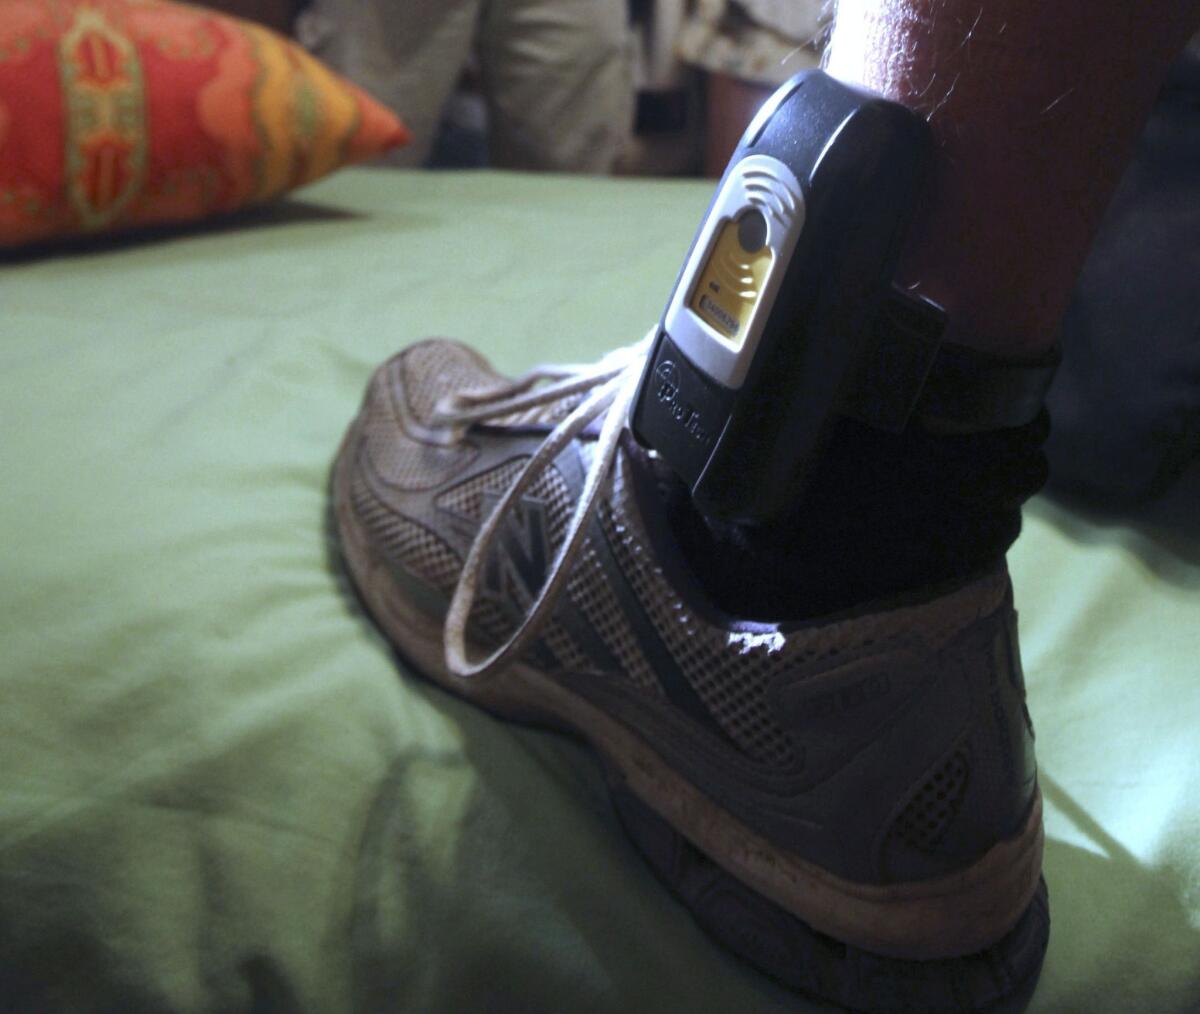 A GPS locator worn on the ankle of a sex-offender parolee in Rio Linda, Calif.